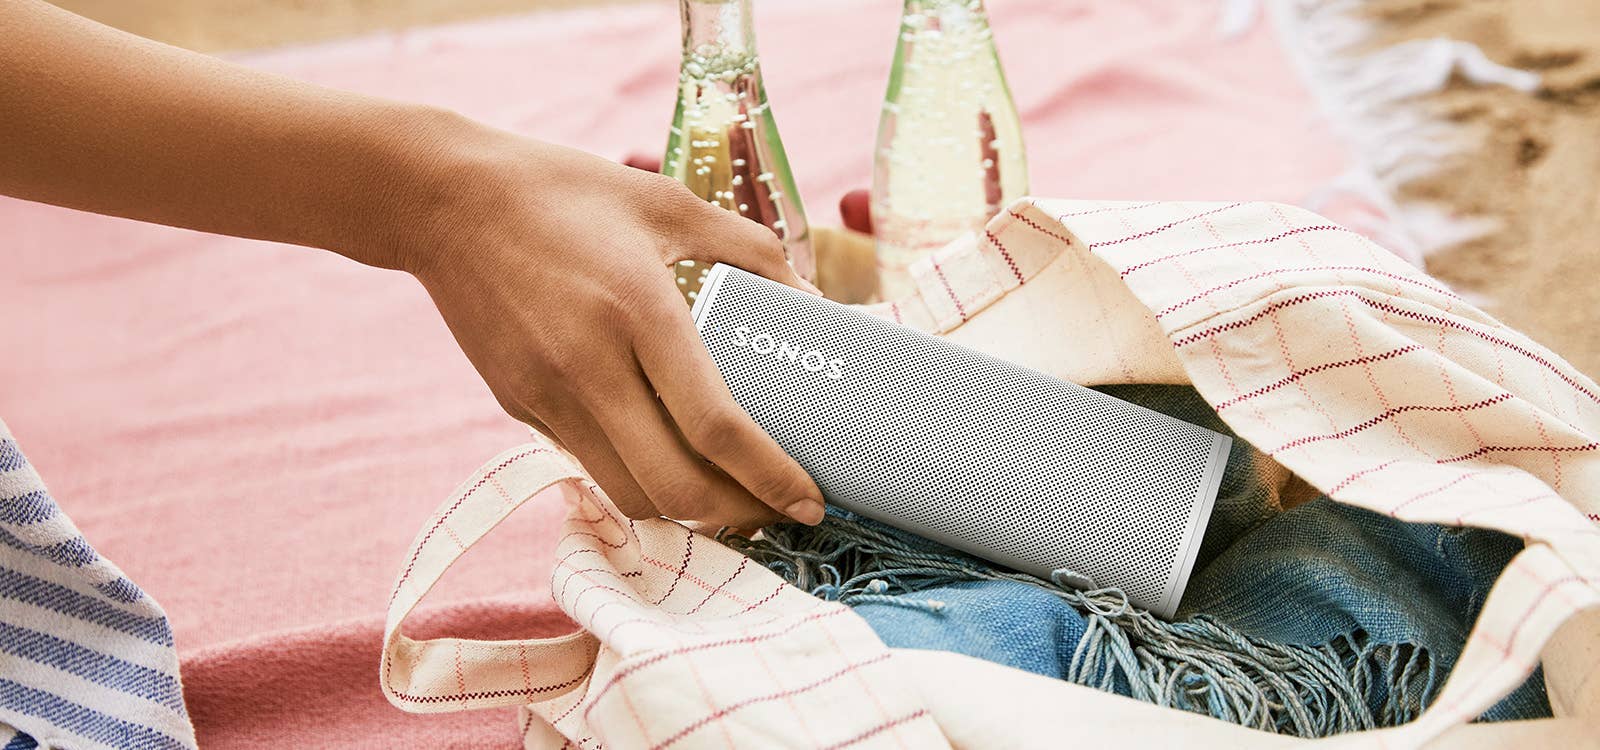 How ComplexLand Attendees Can Go Home with The New Sonos Roam |